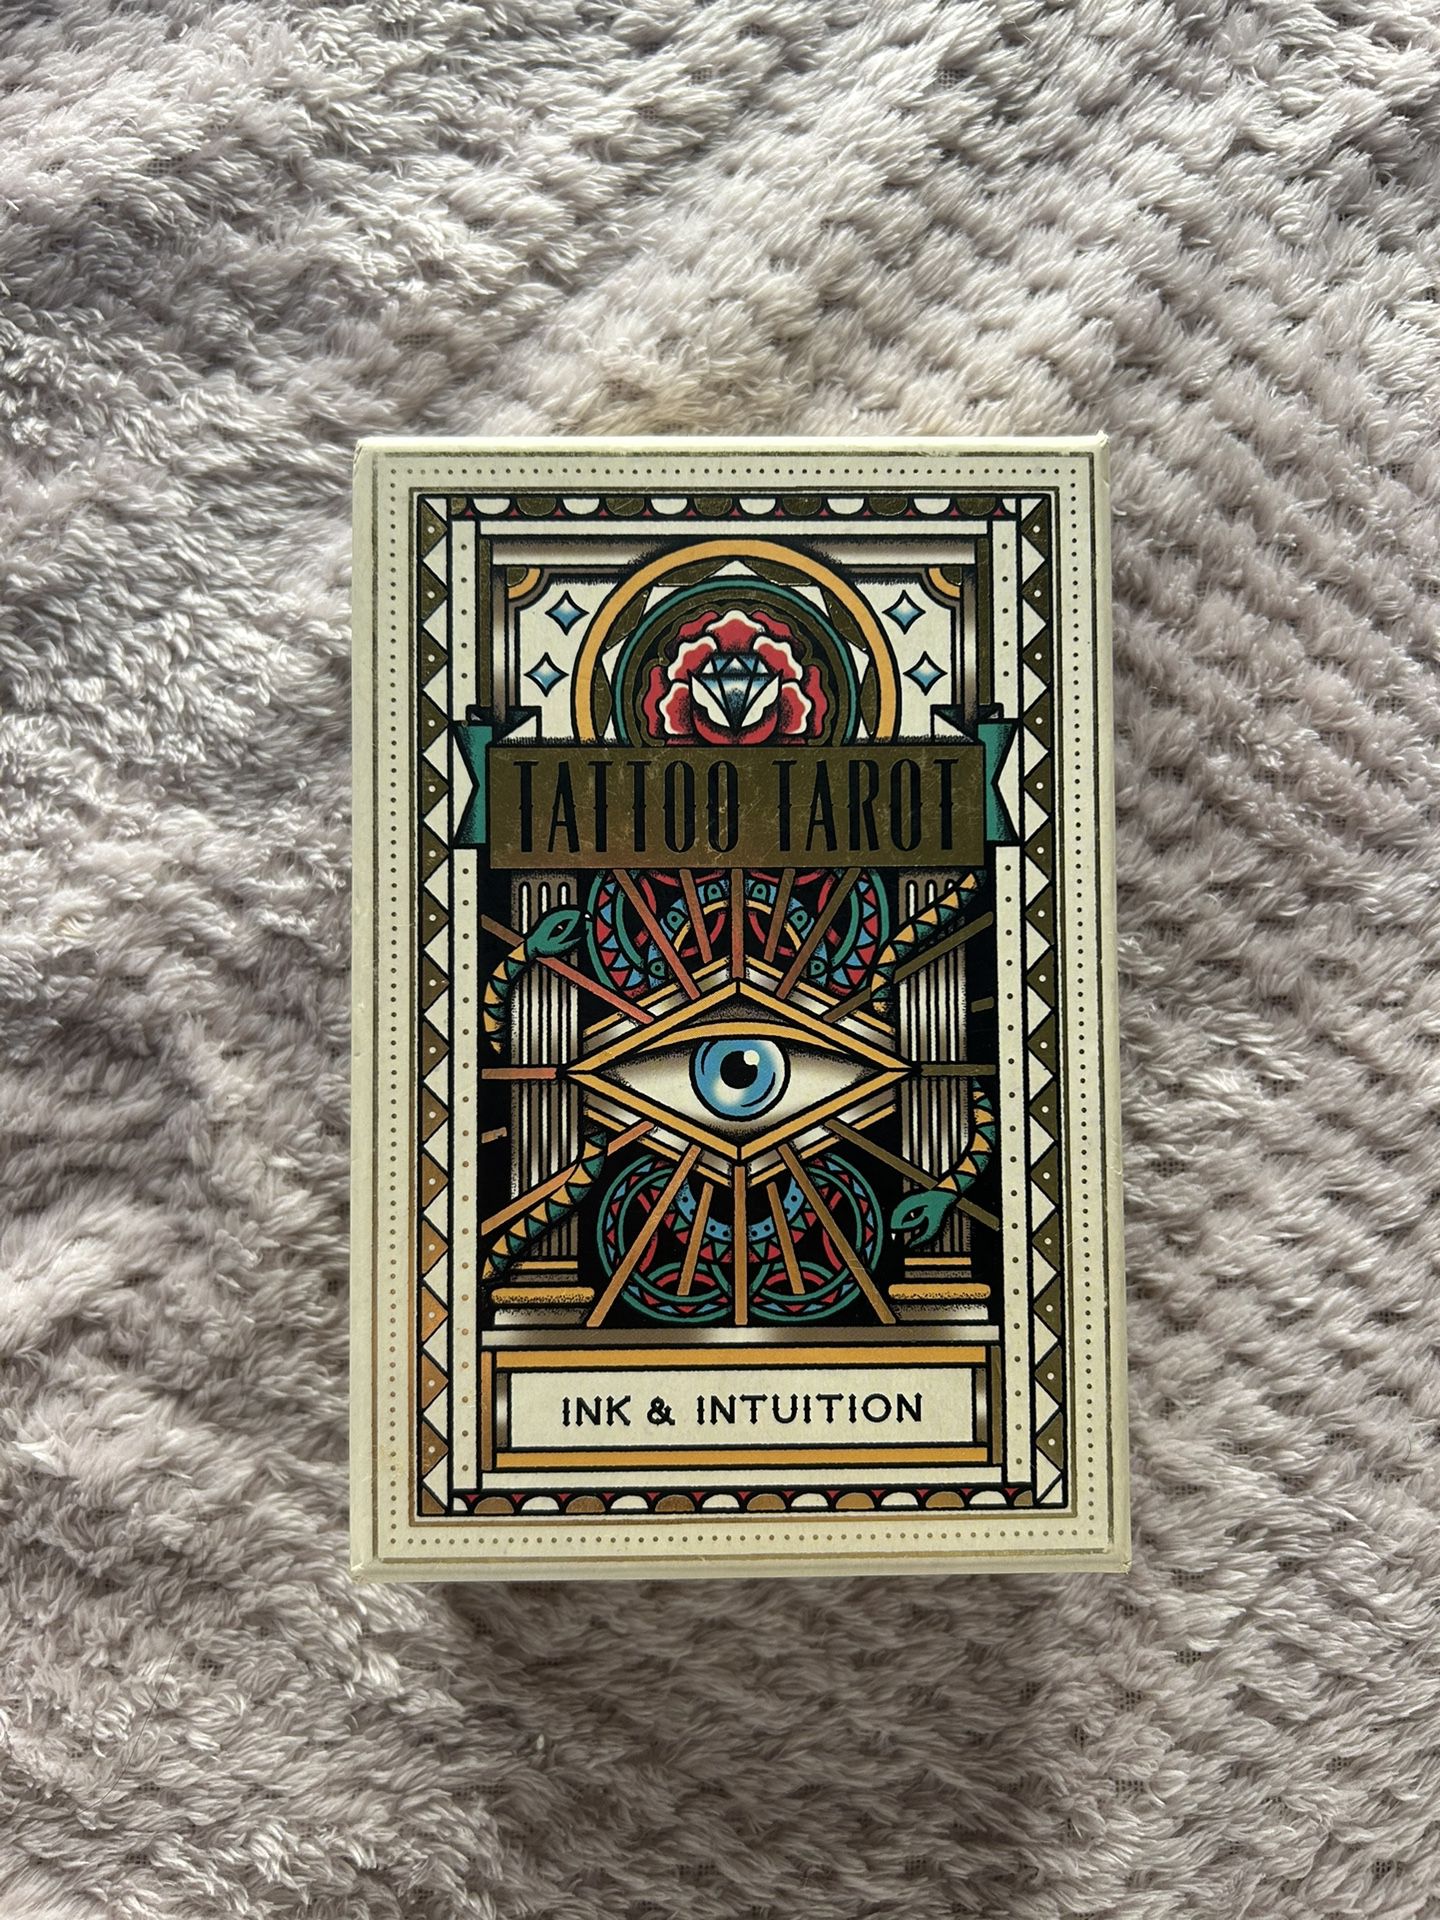 Tattoo Tarot - Ink & Intuition Cards